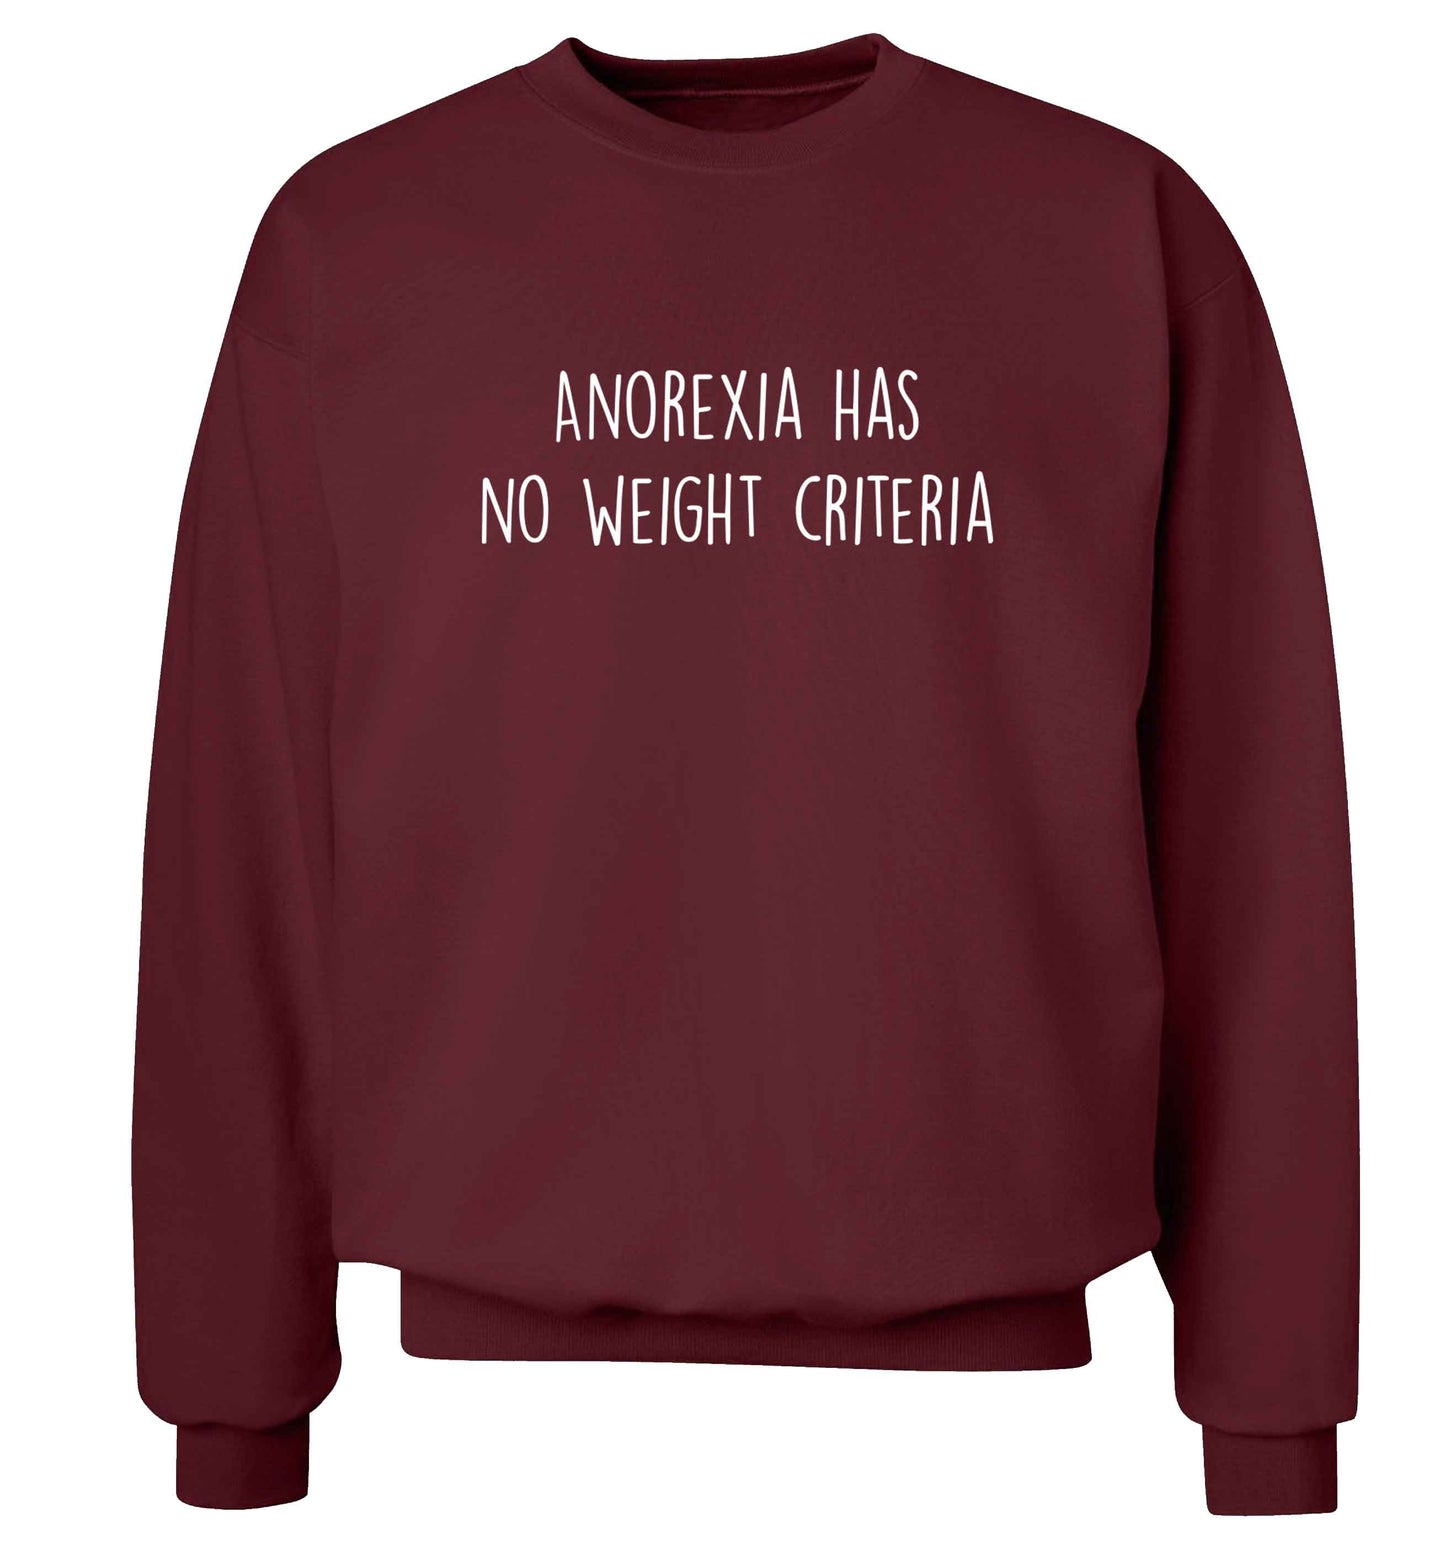 Anorexia has no weight criteria adult's unisex maroon sweater 2XL